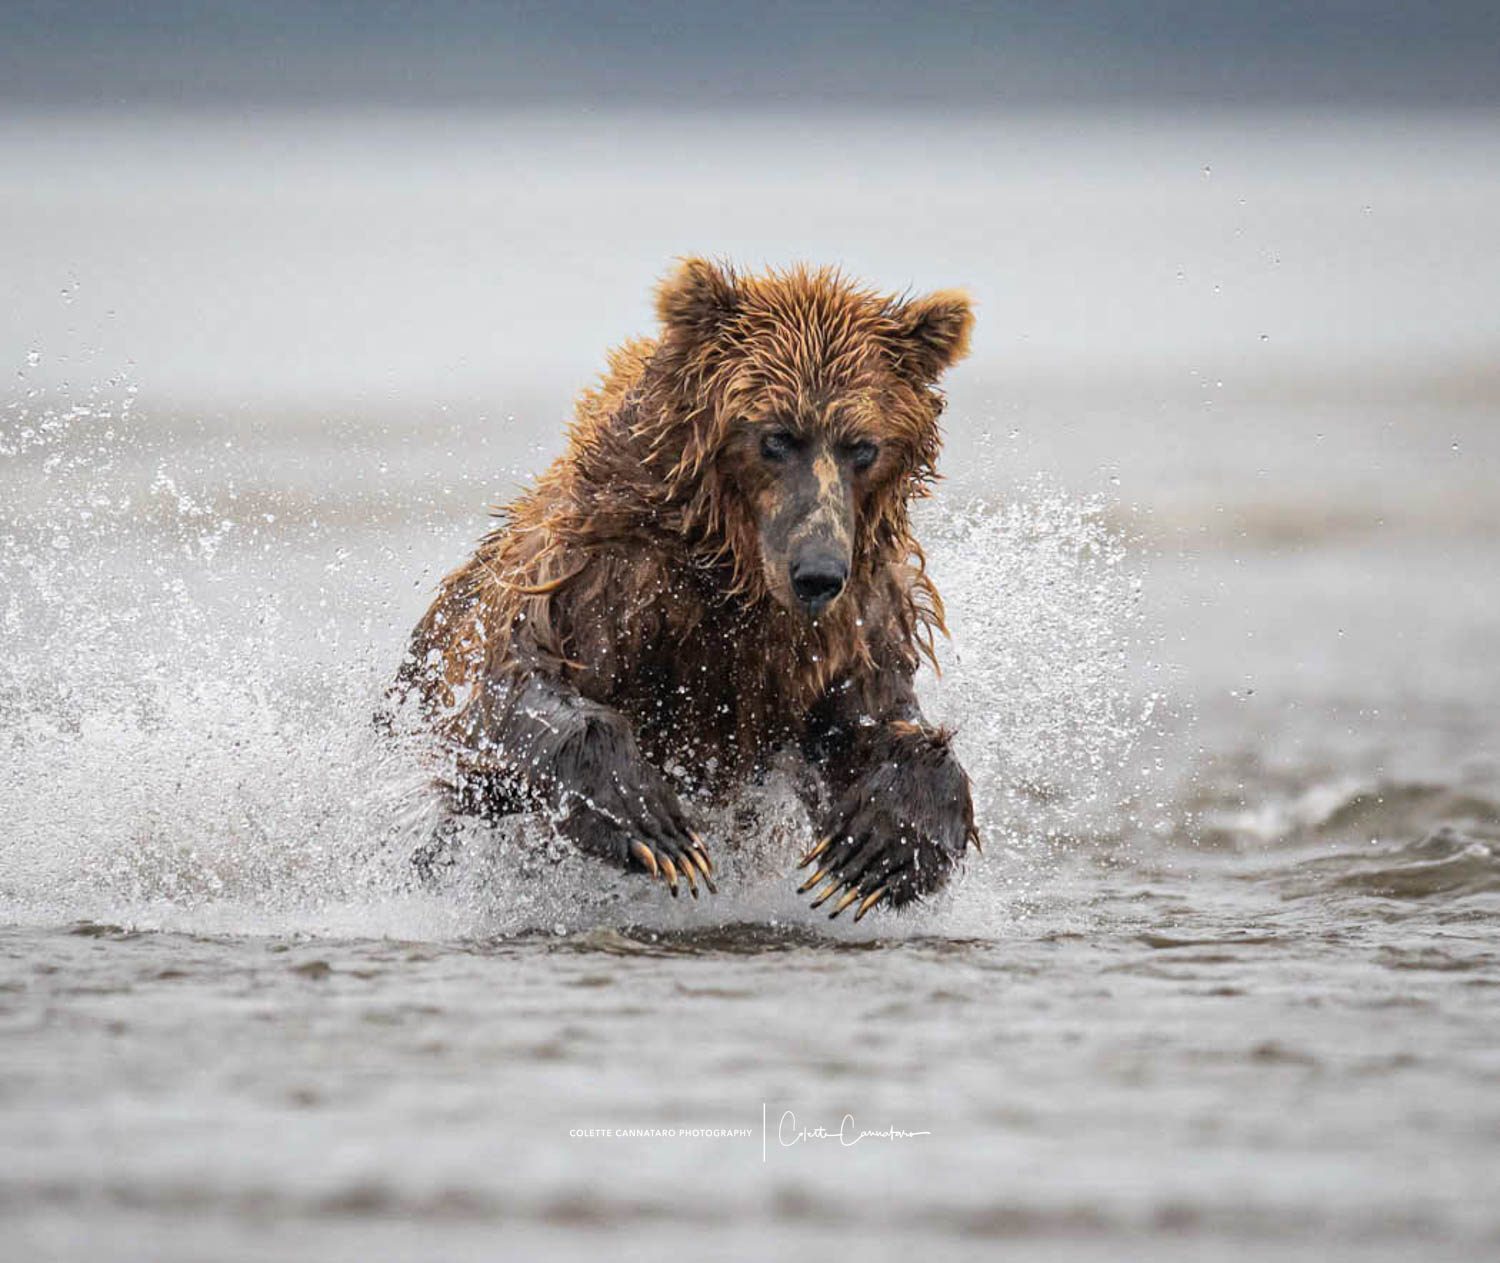 At the start of the salmon run in Alaska, the coastal brown bears start to fish to replenish their deleted fat reserves for the...